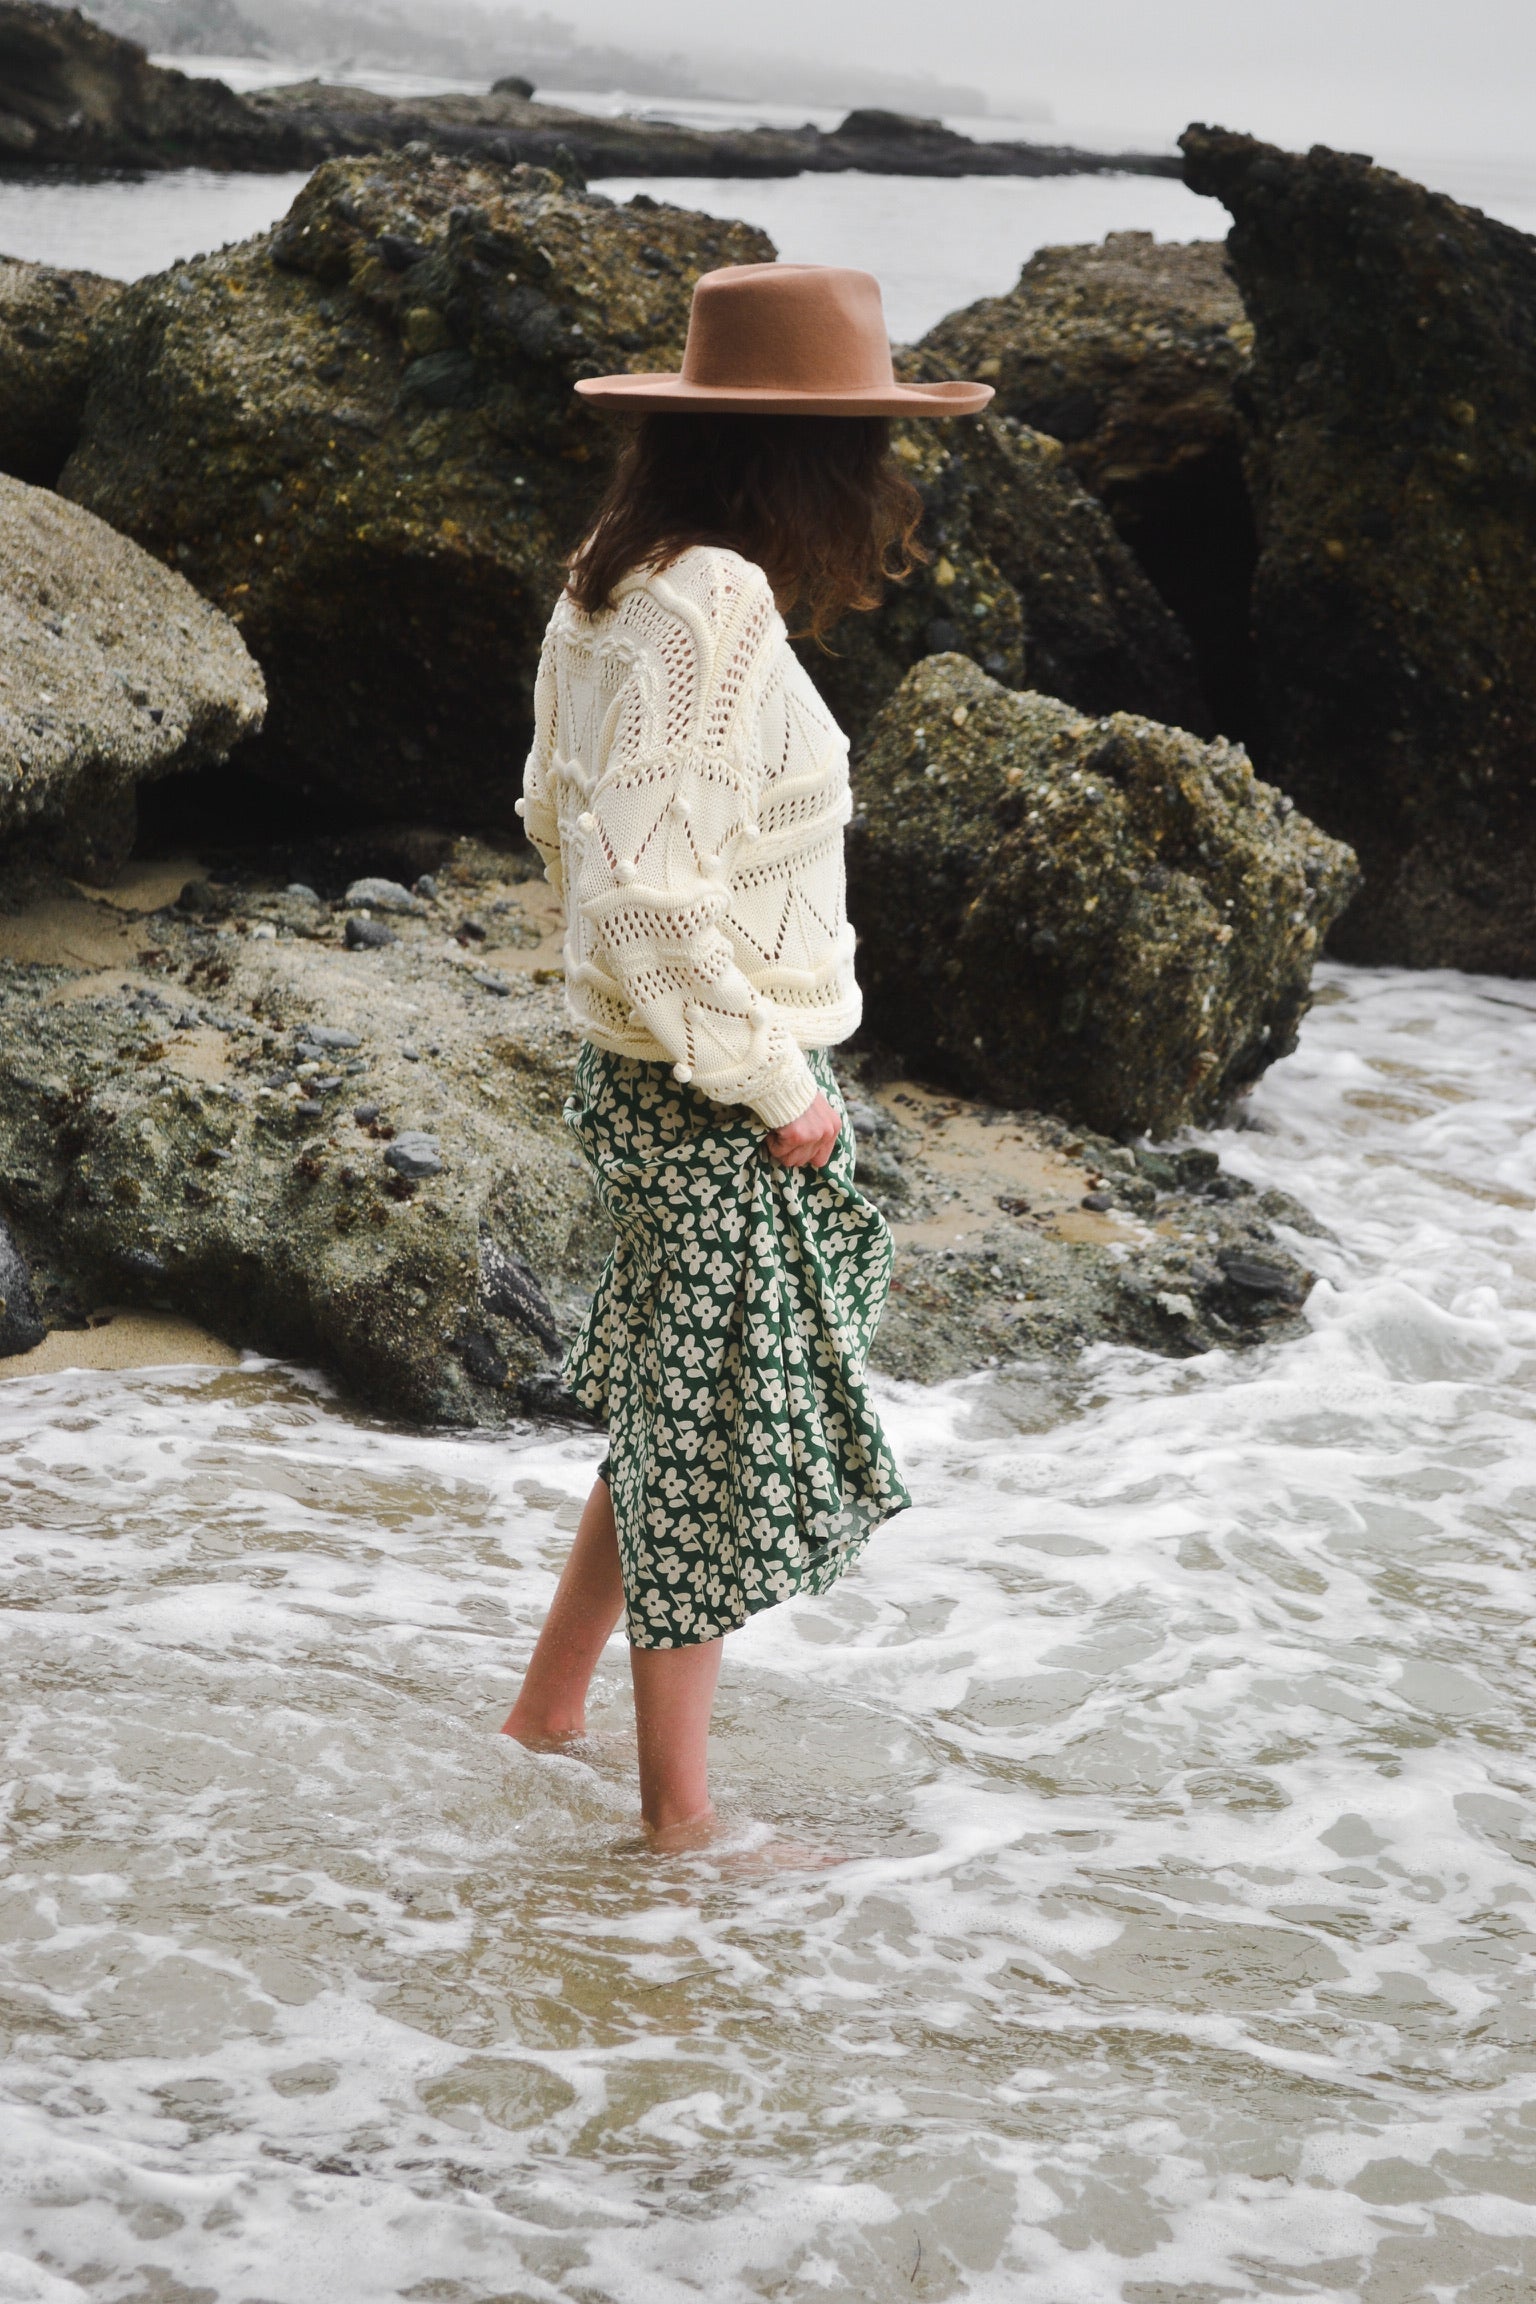 Laura Prietto wearing a sustainable green daisy skirt and hand-knit sweater at the beach in southern California | Thread Spun Blog